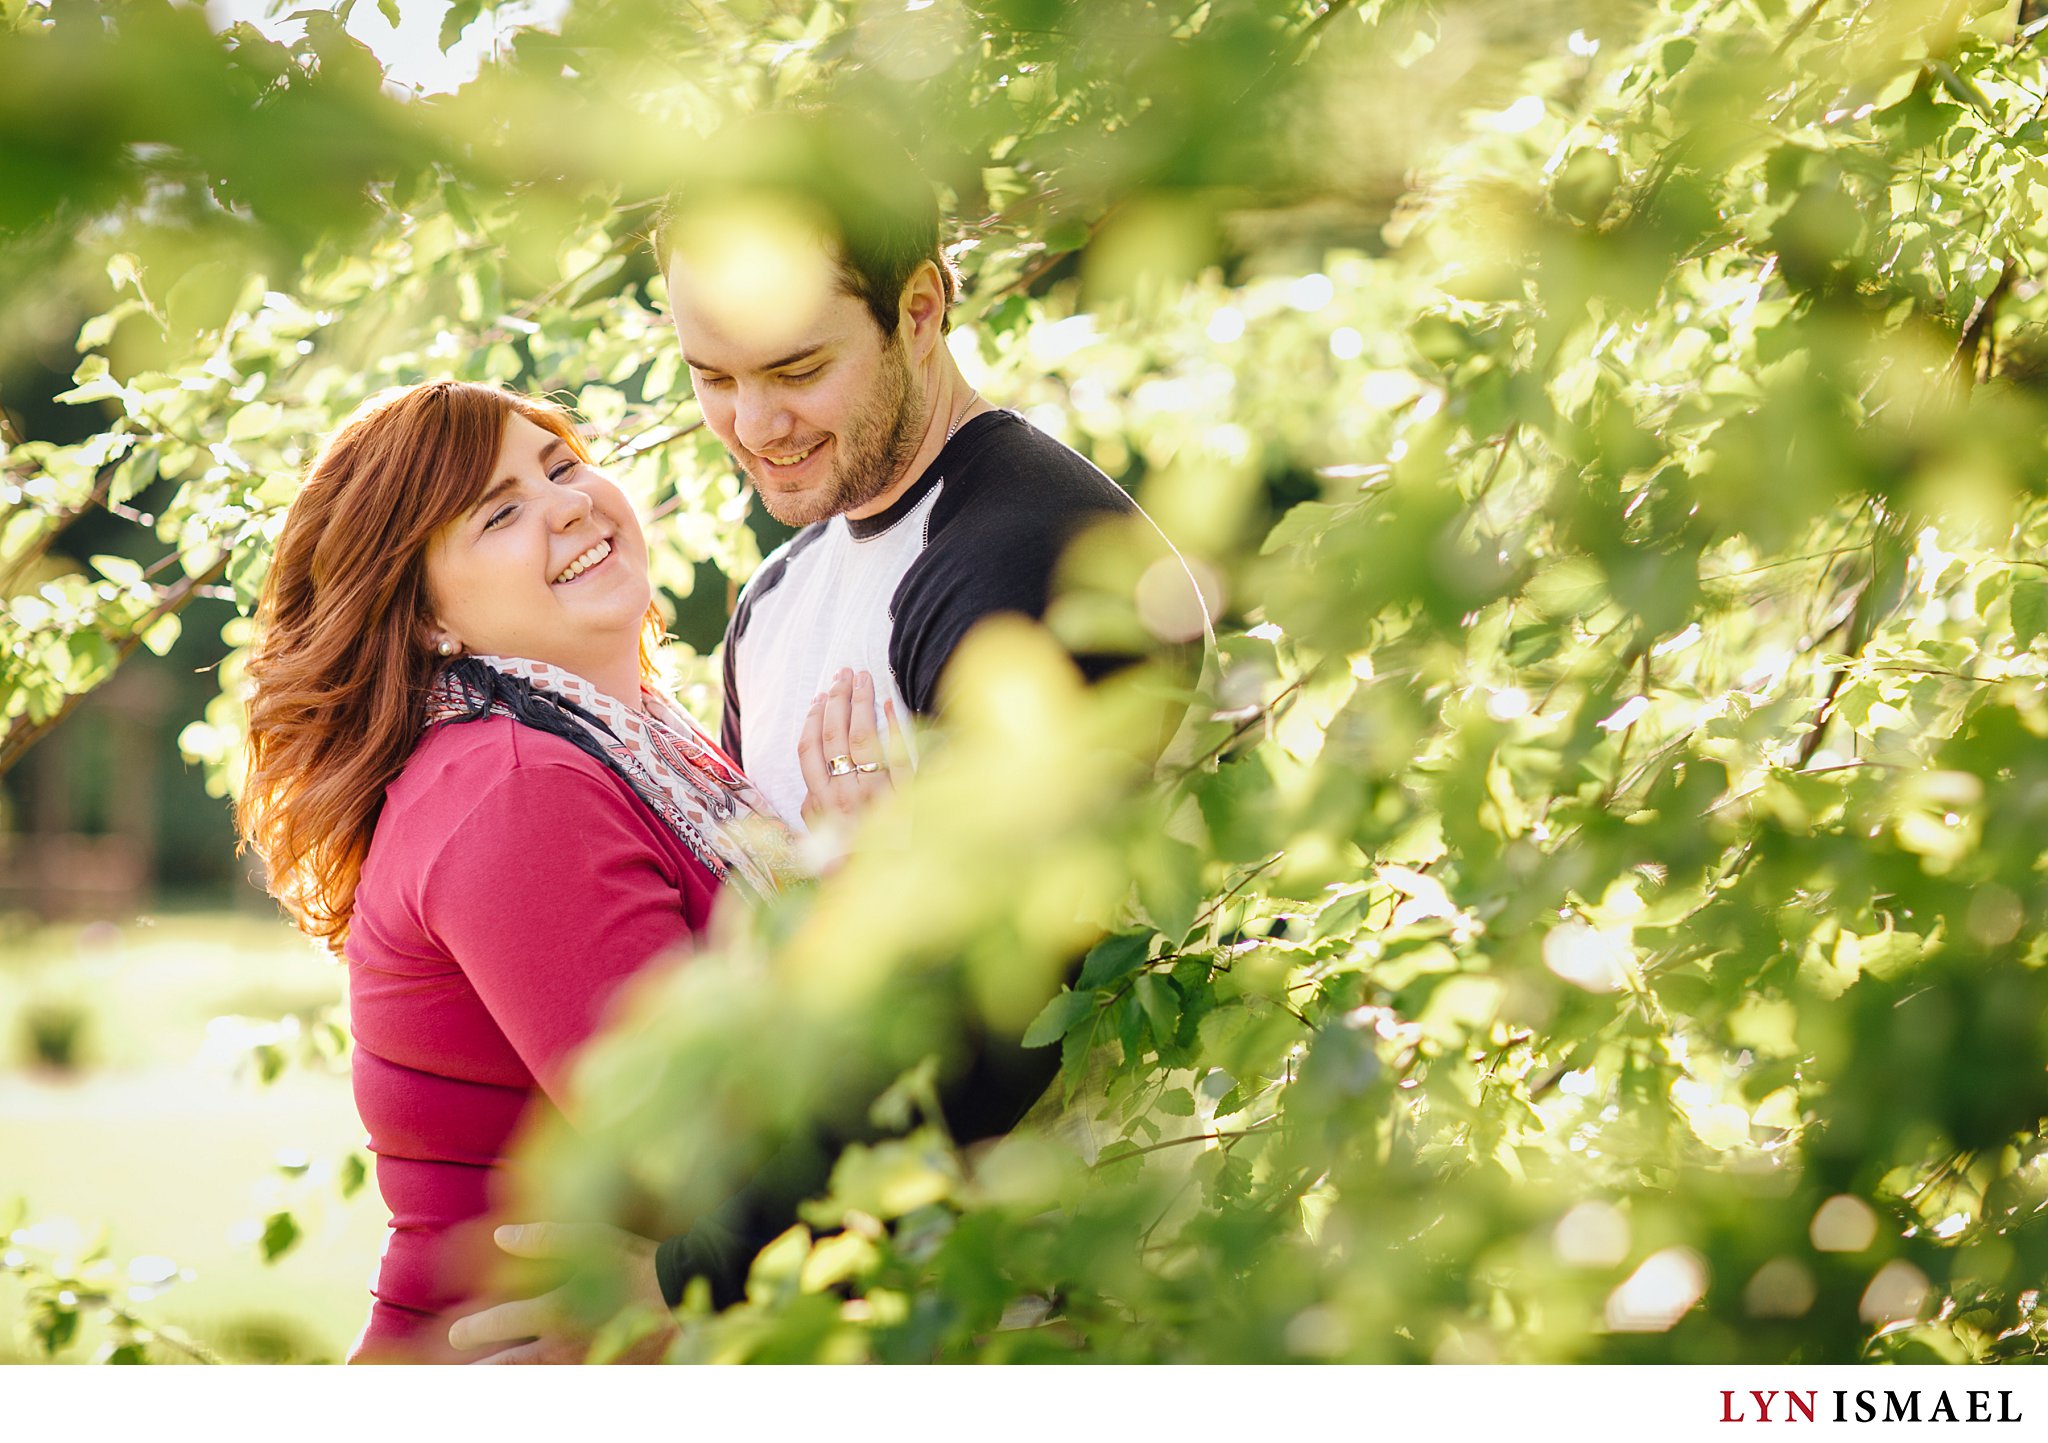 A happy photograph taken at a couple's engagement session at the Arboretum in Guelph, Ontario.